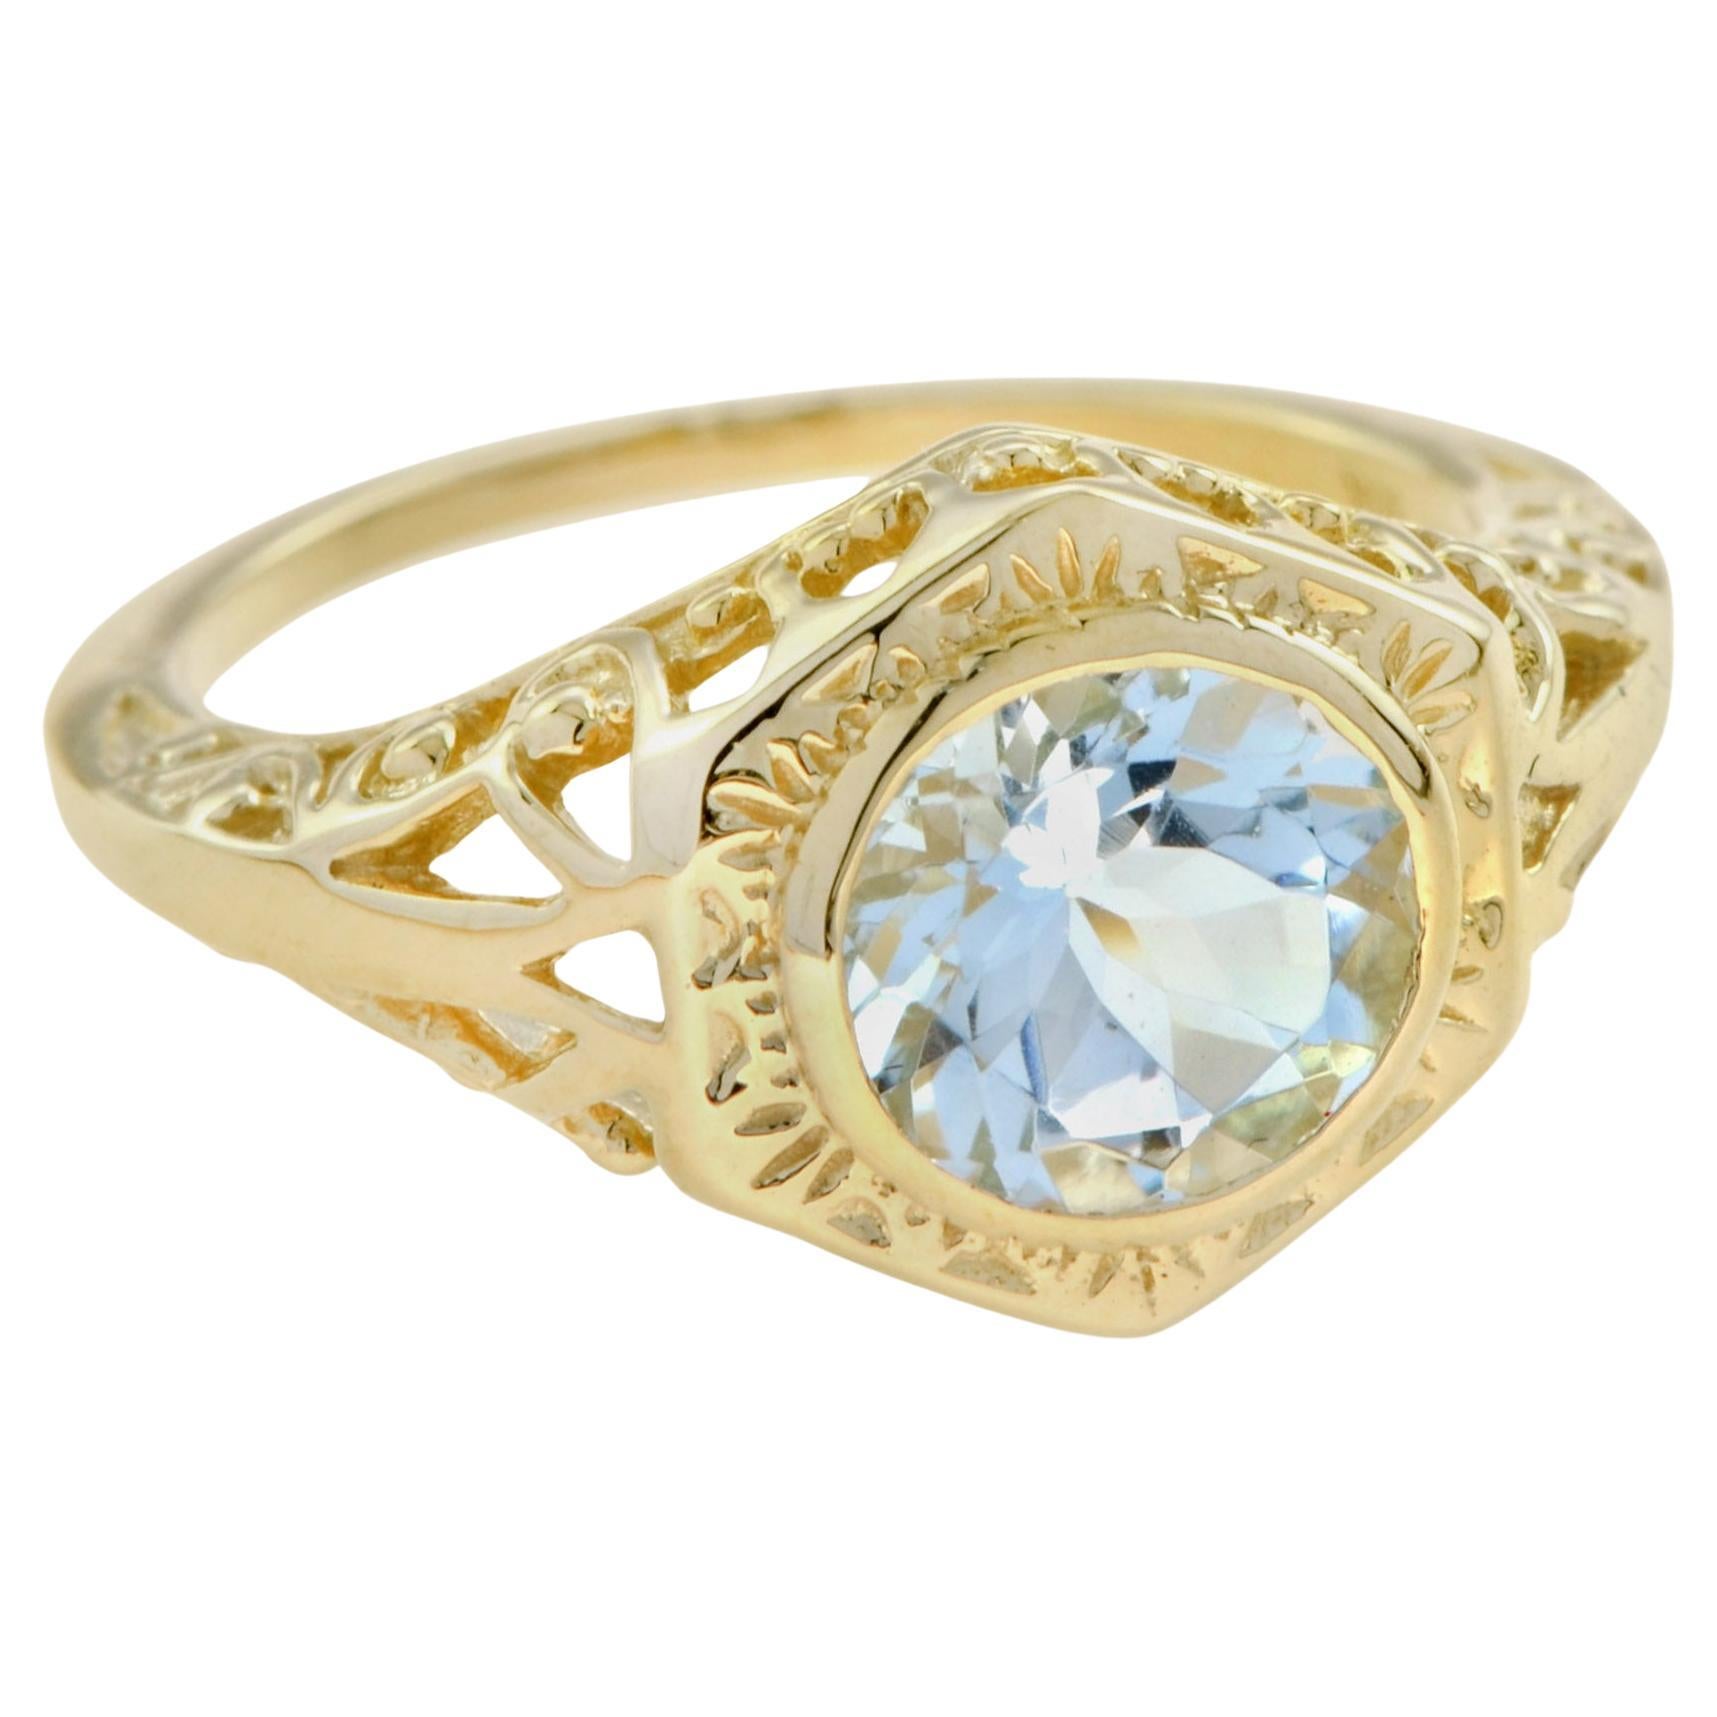 For Sale:  Natural Aquamarine Hexagon Shape Vintage Style Filigree Ring in Solid 9K Gold